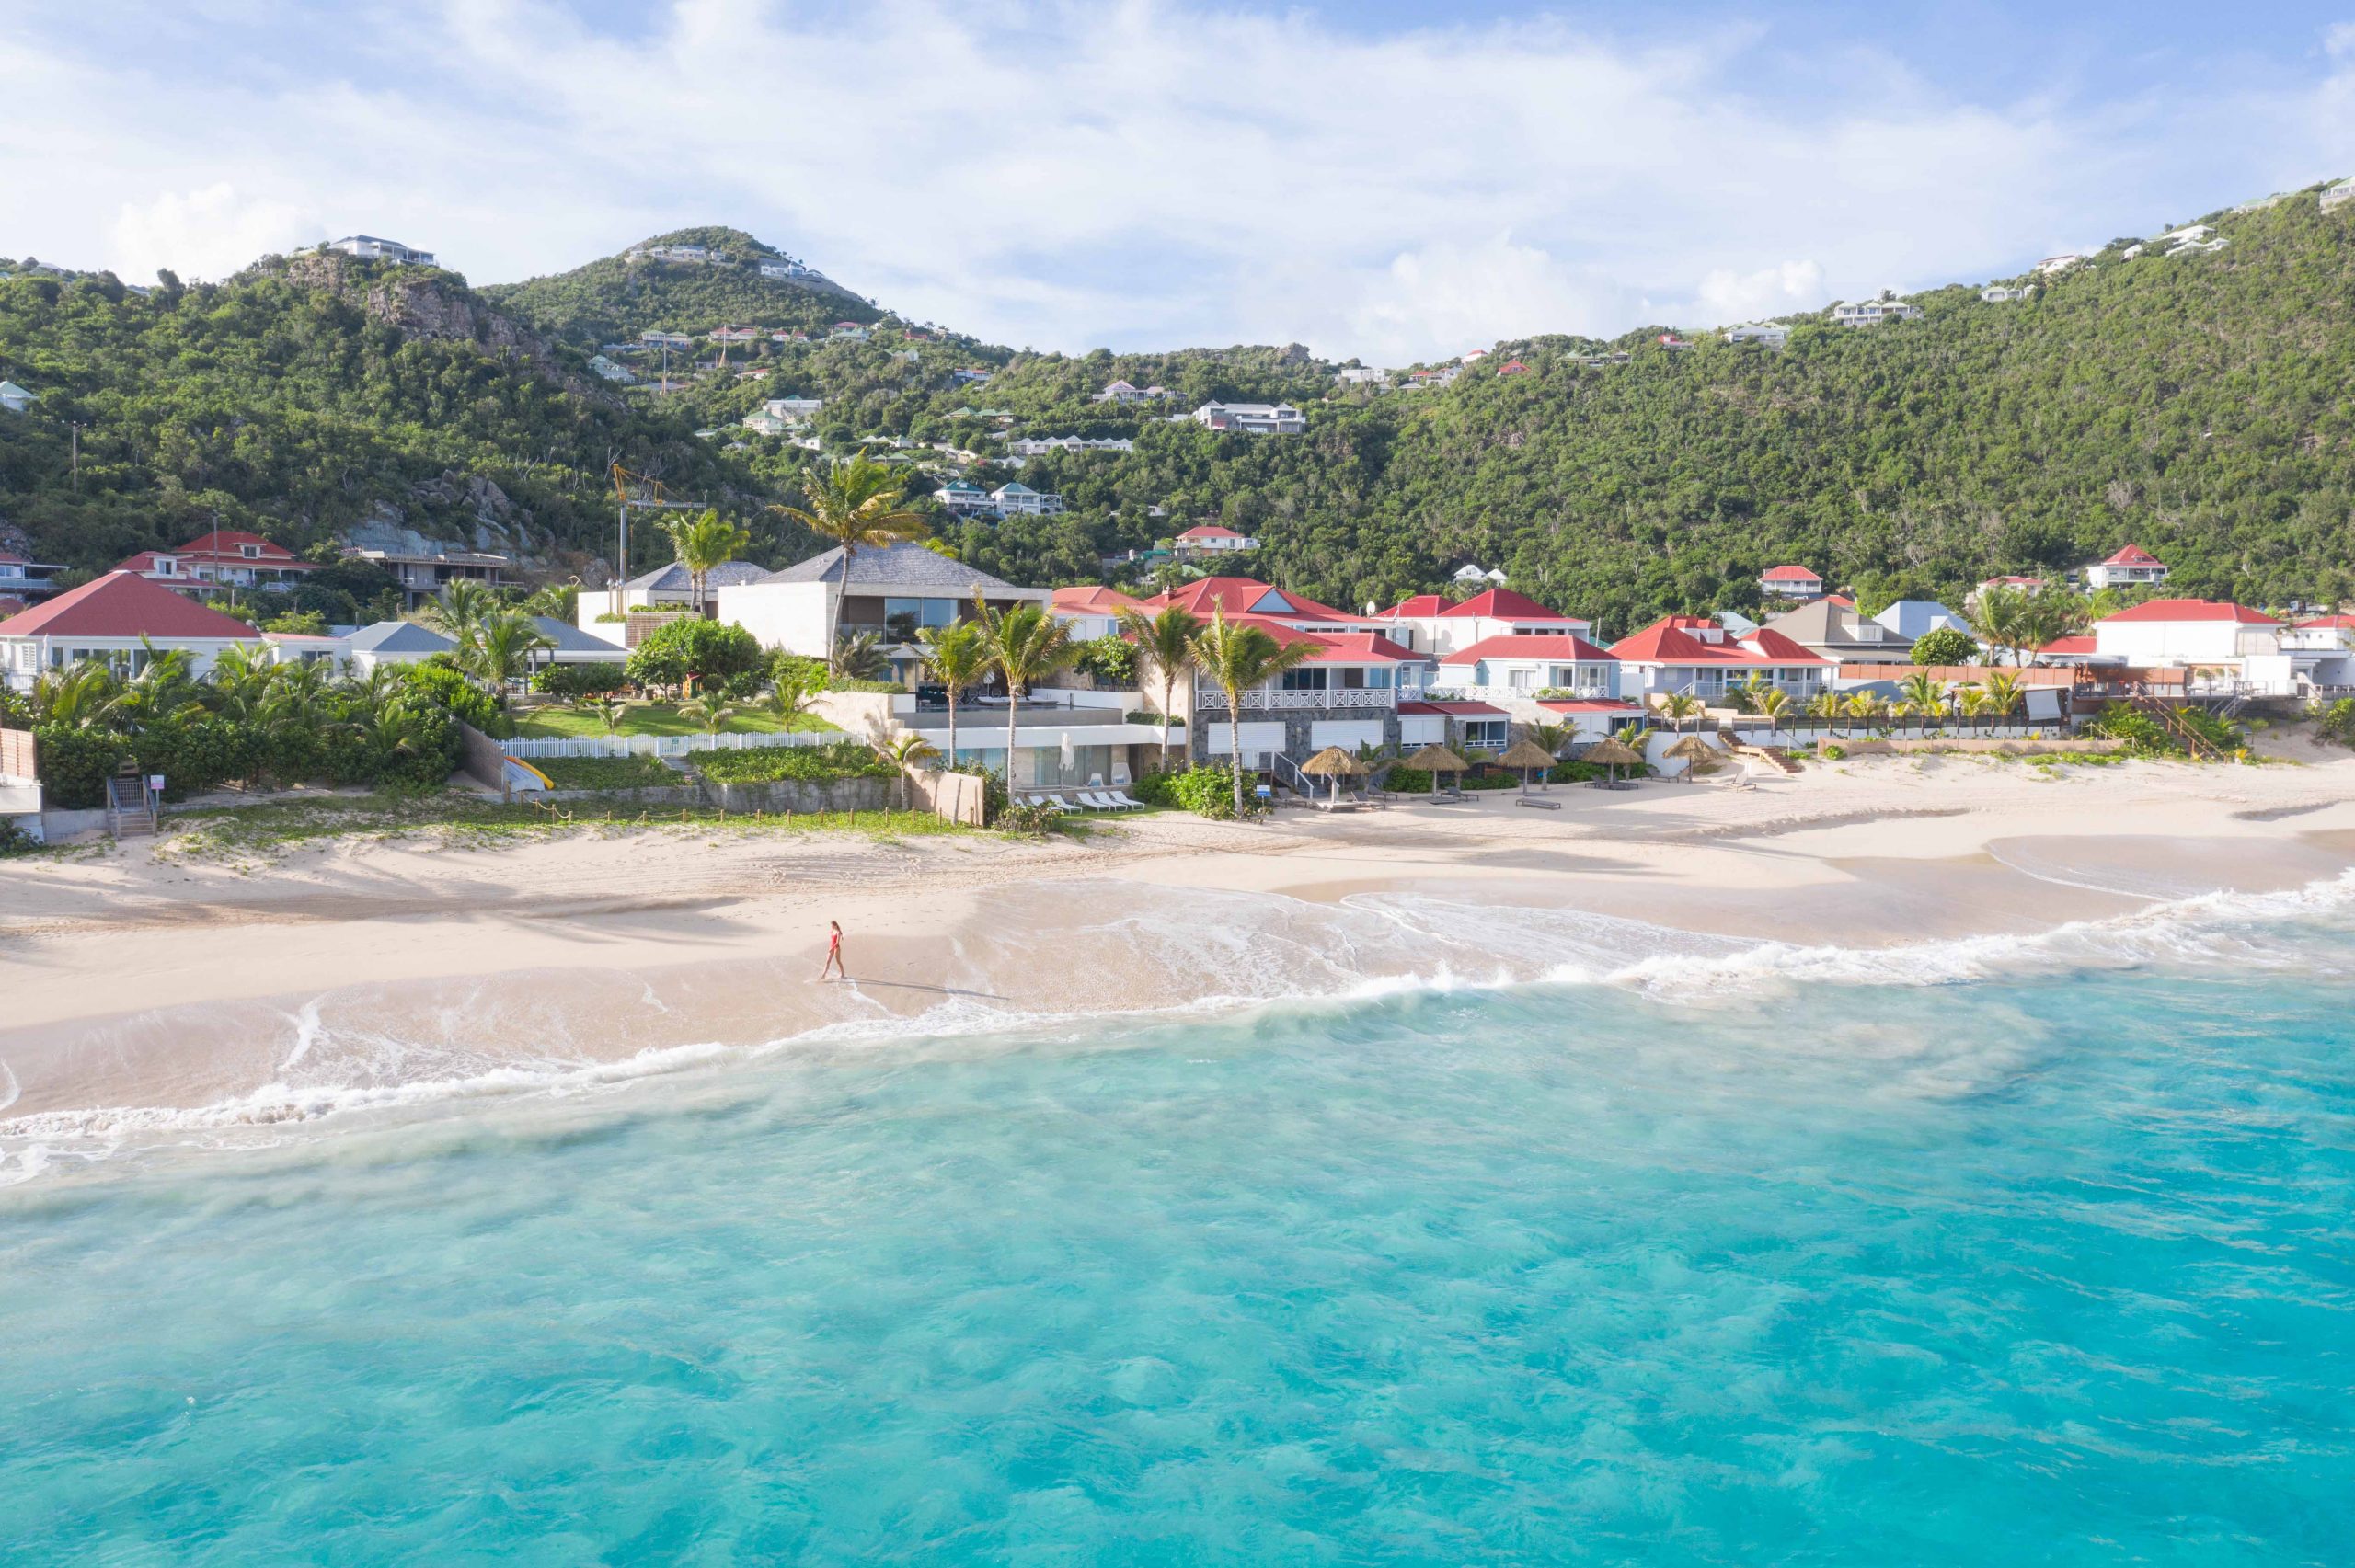 The Hidden Treasures of St. Barths: A Guide to Favorite Places